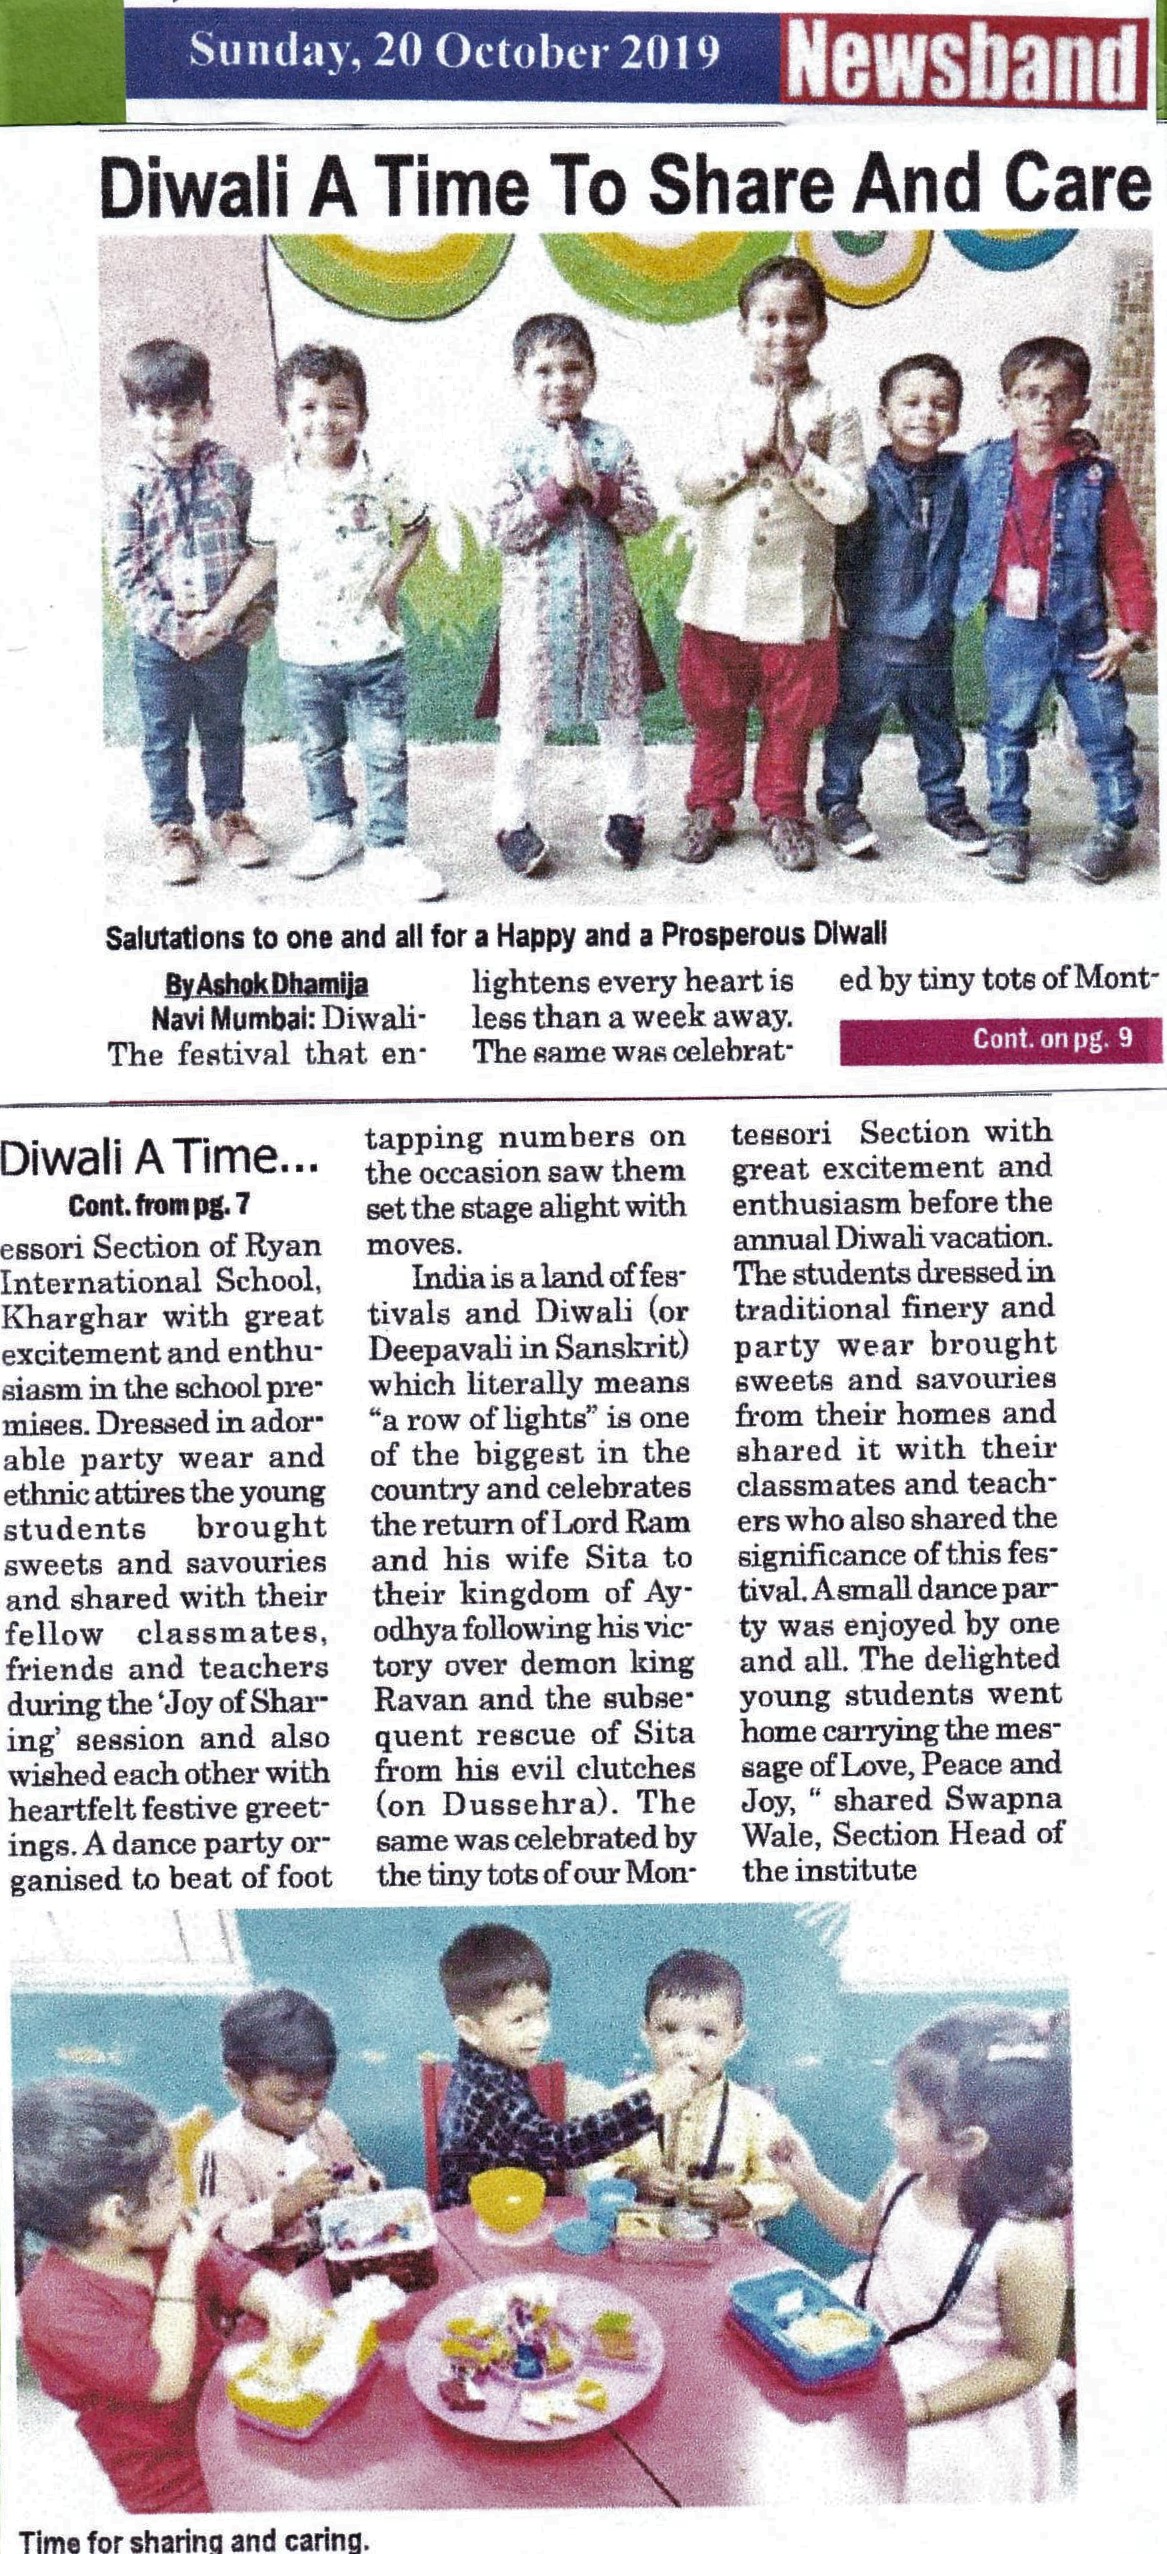 Diwali a time to share and care was mentioned in News band - Ryan International School, Kharghar